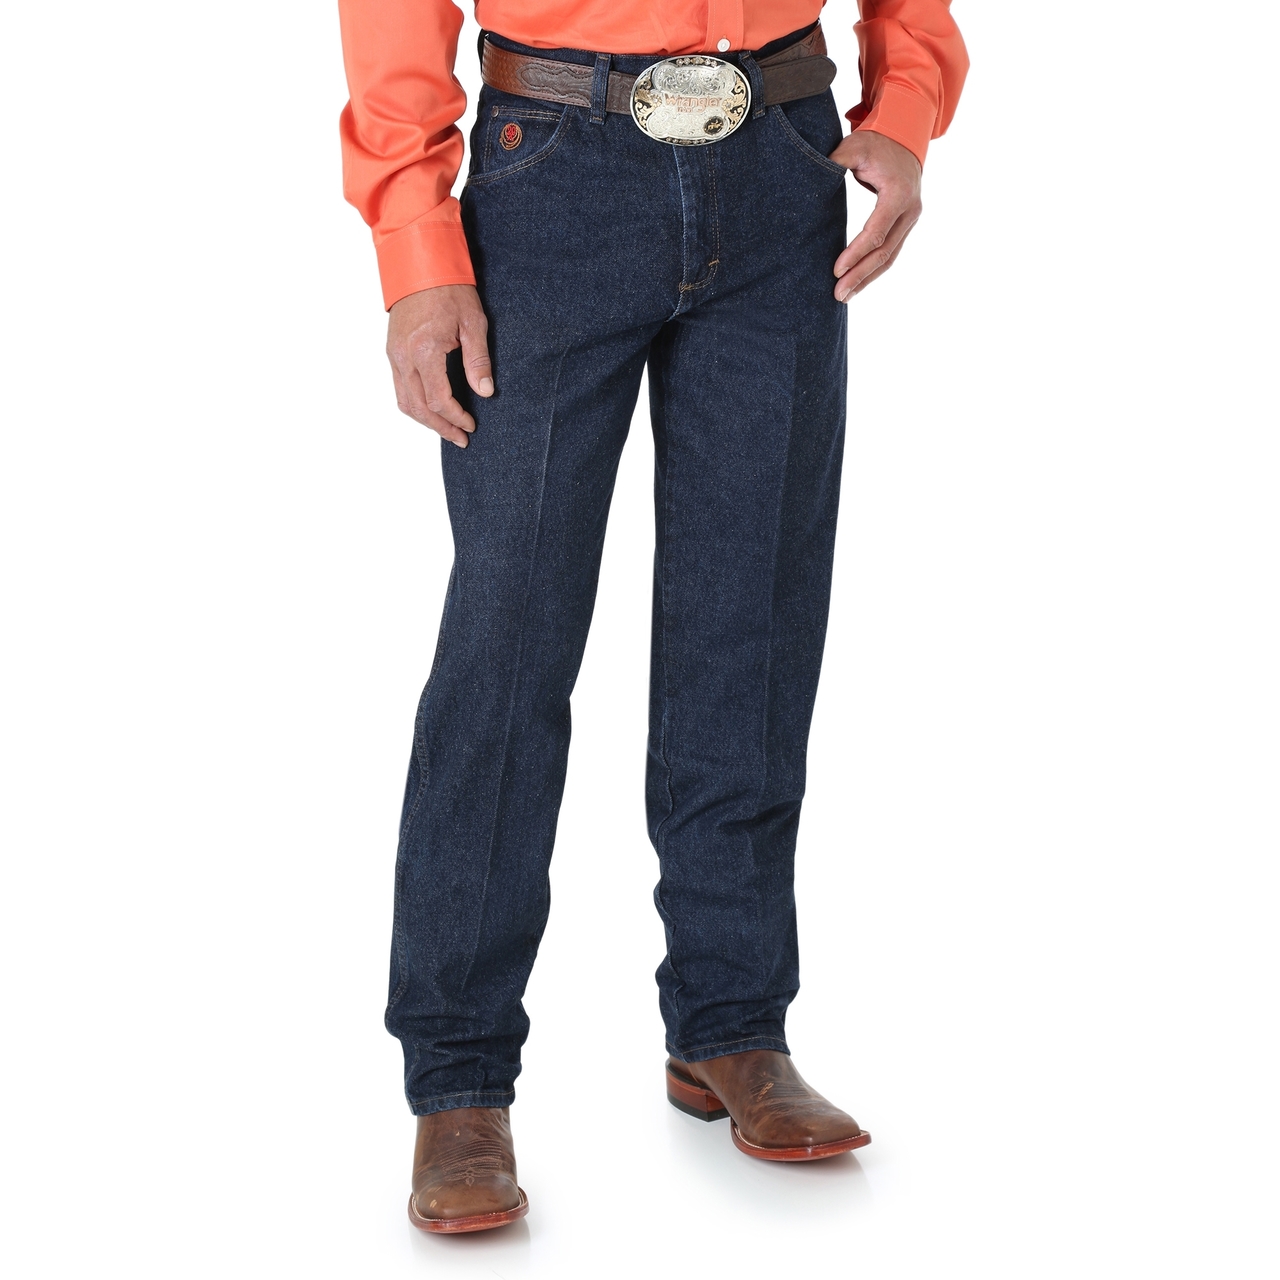 Men's Wrangler Jeans 20X No. 22 Dark Denim - Chick Elms Grand Entry Western  Store and Rodeo Shop